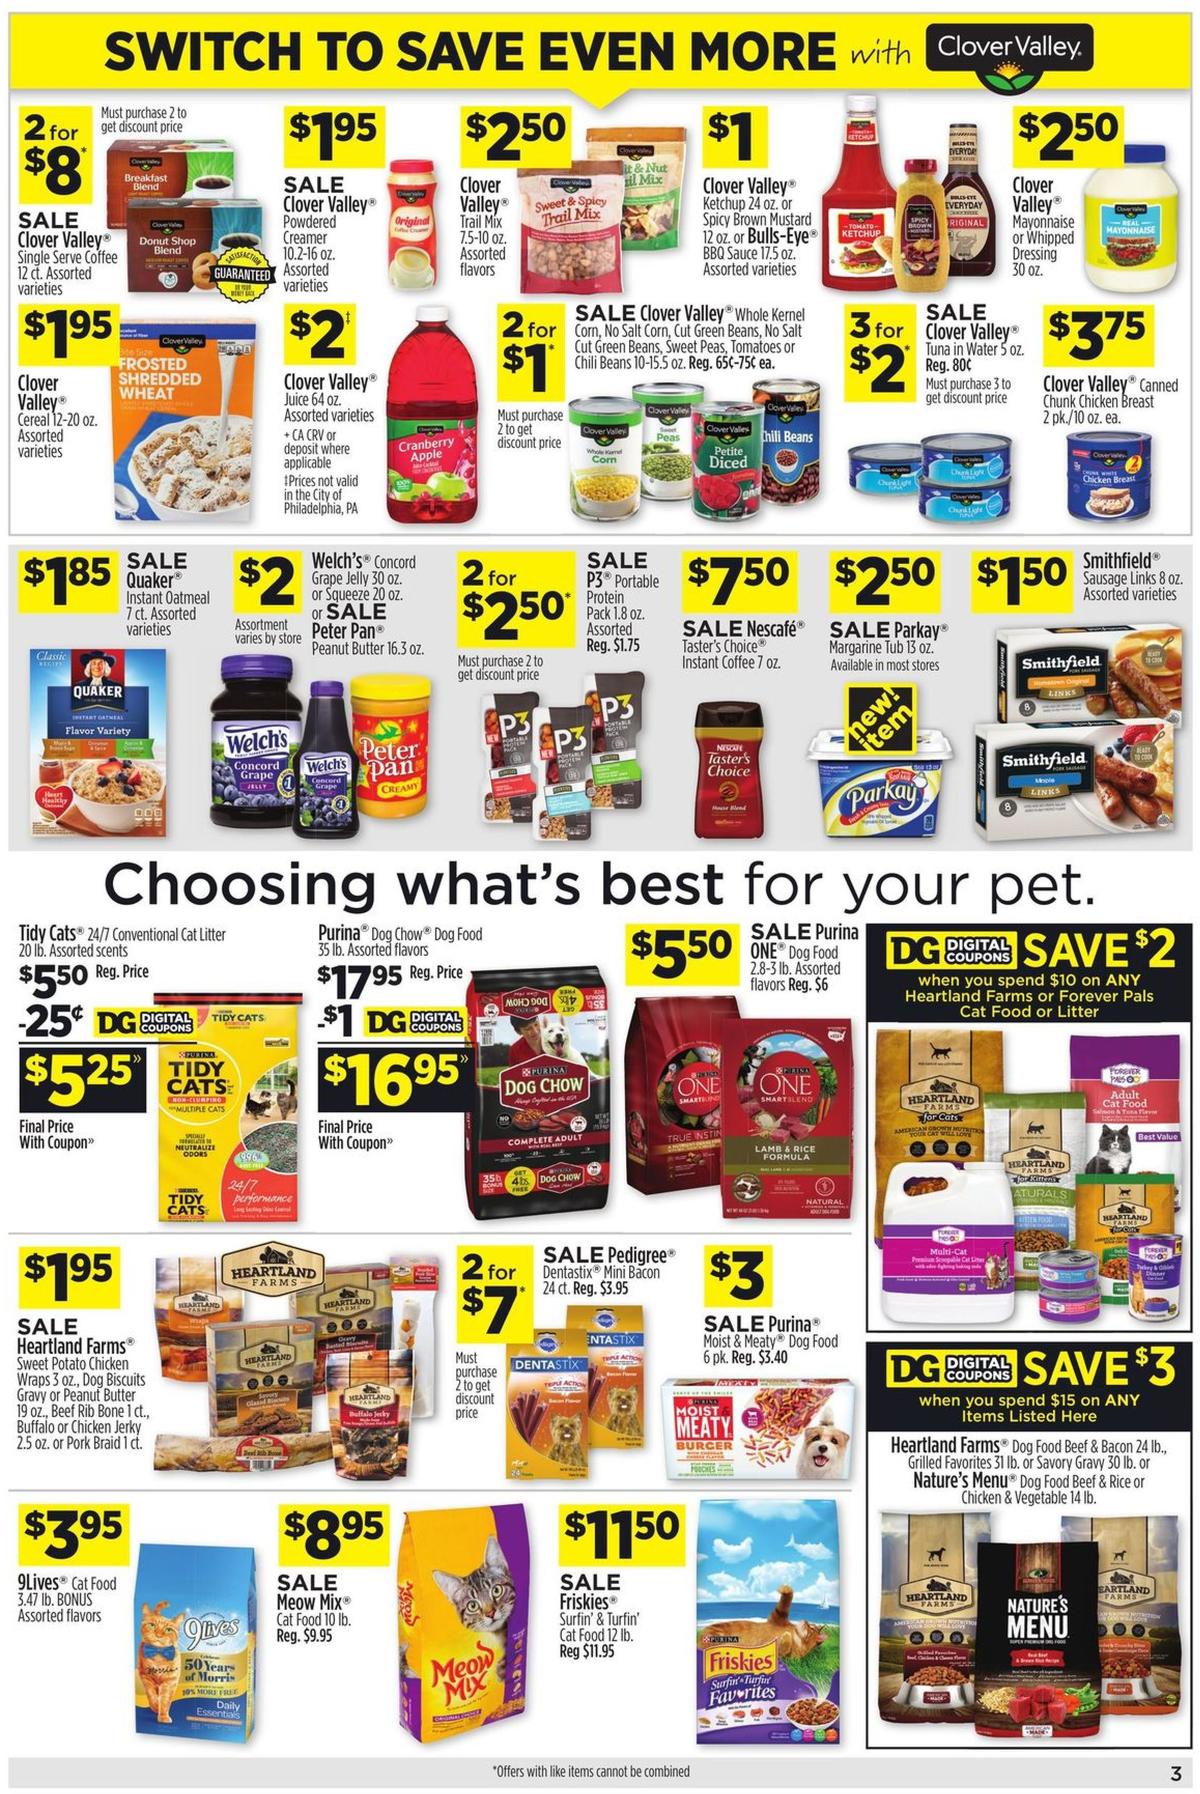 Dollar General Weekly Ad from September 29